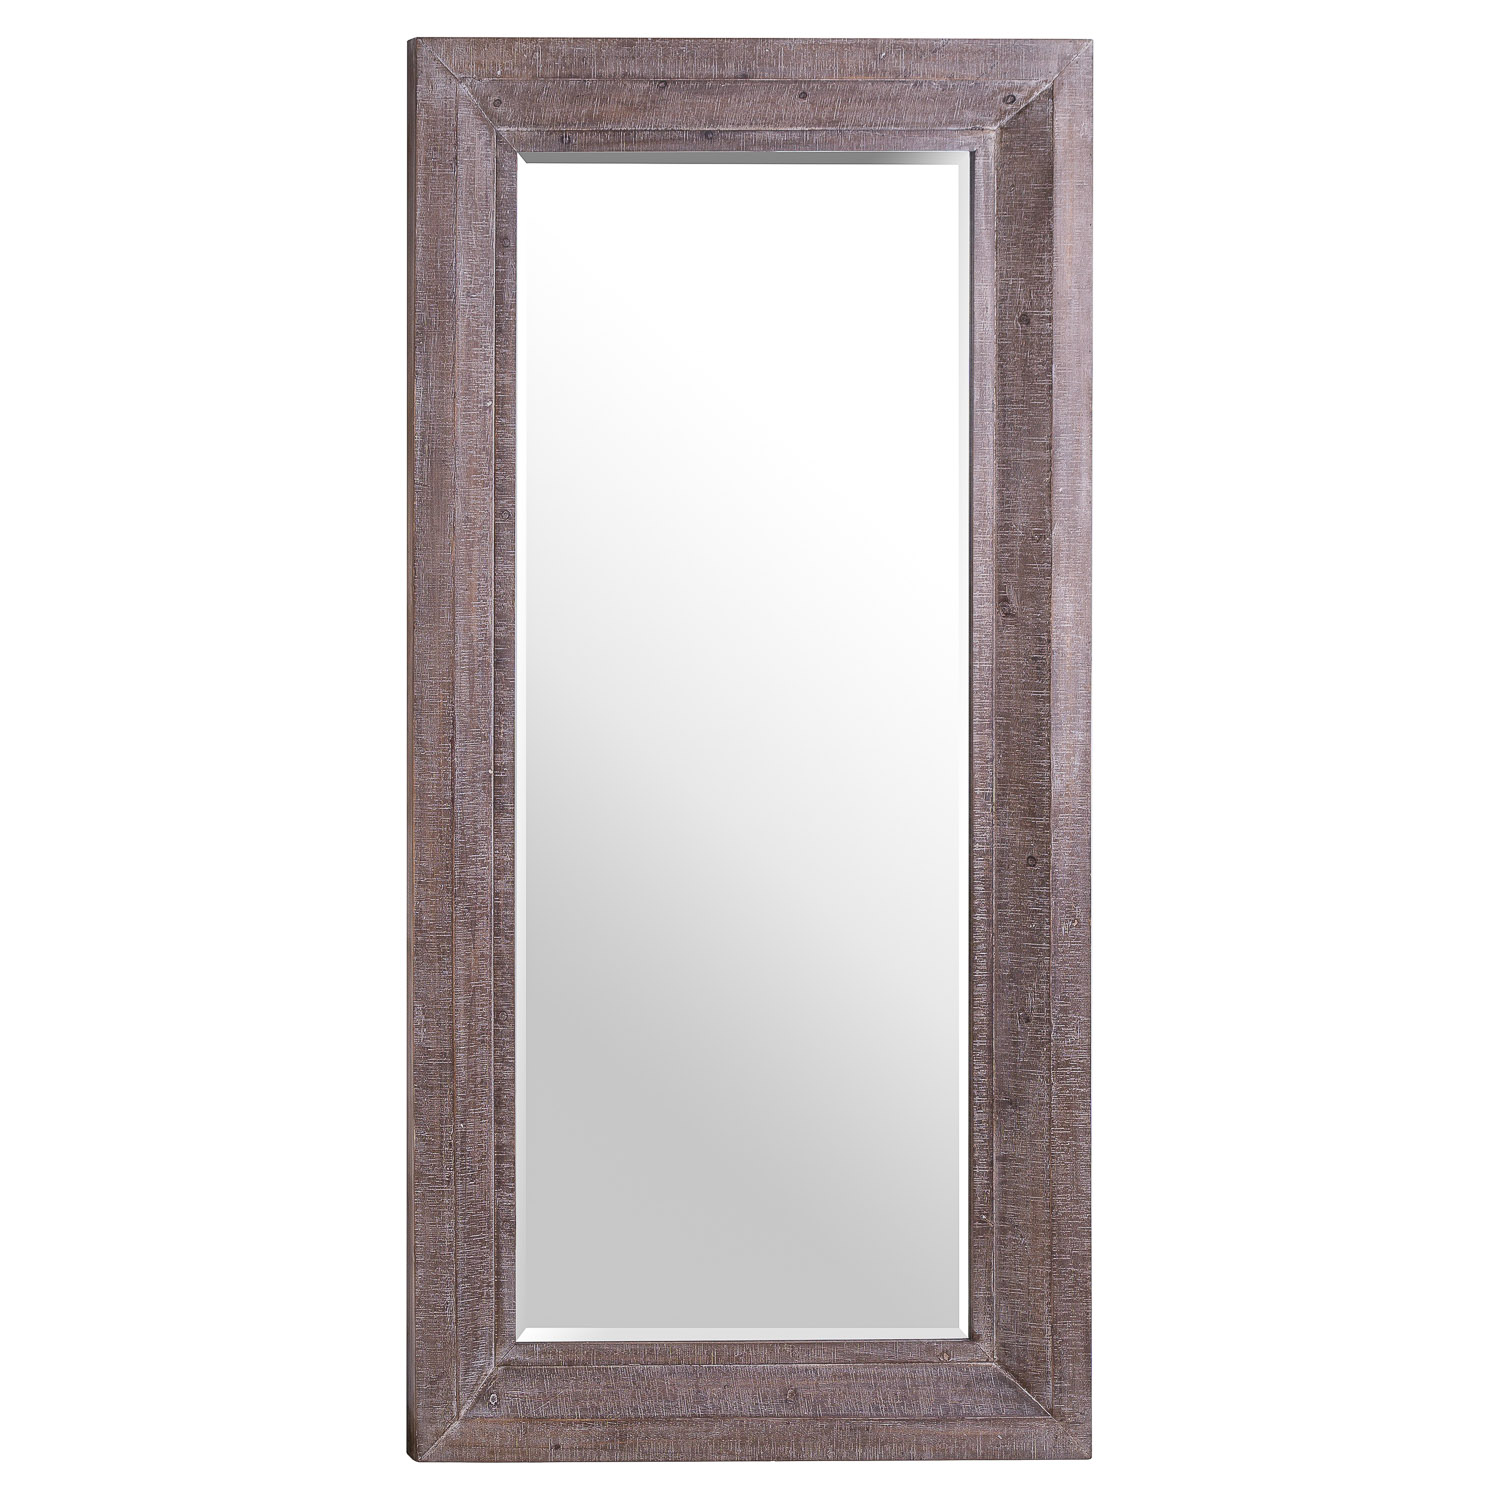 The Wharfedale Reclaimed Wooden Grand Mirror